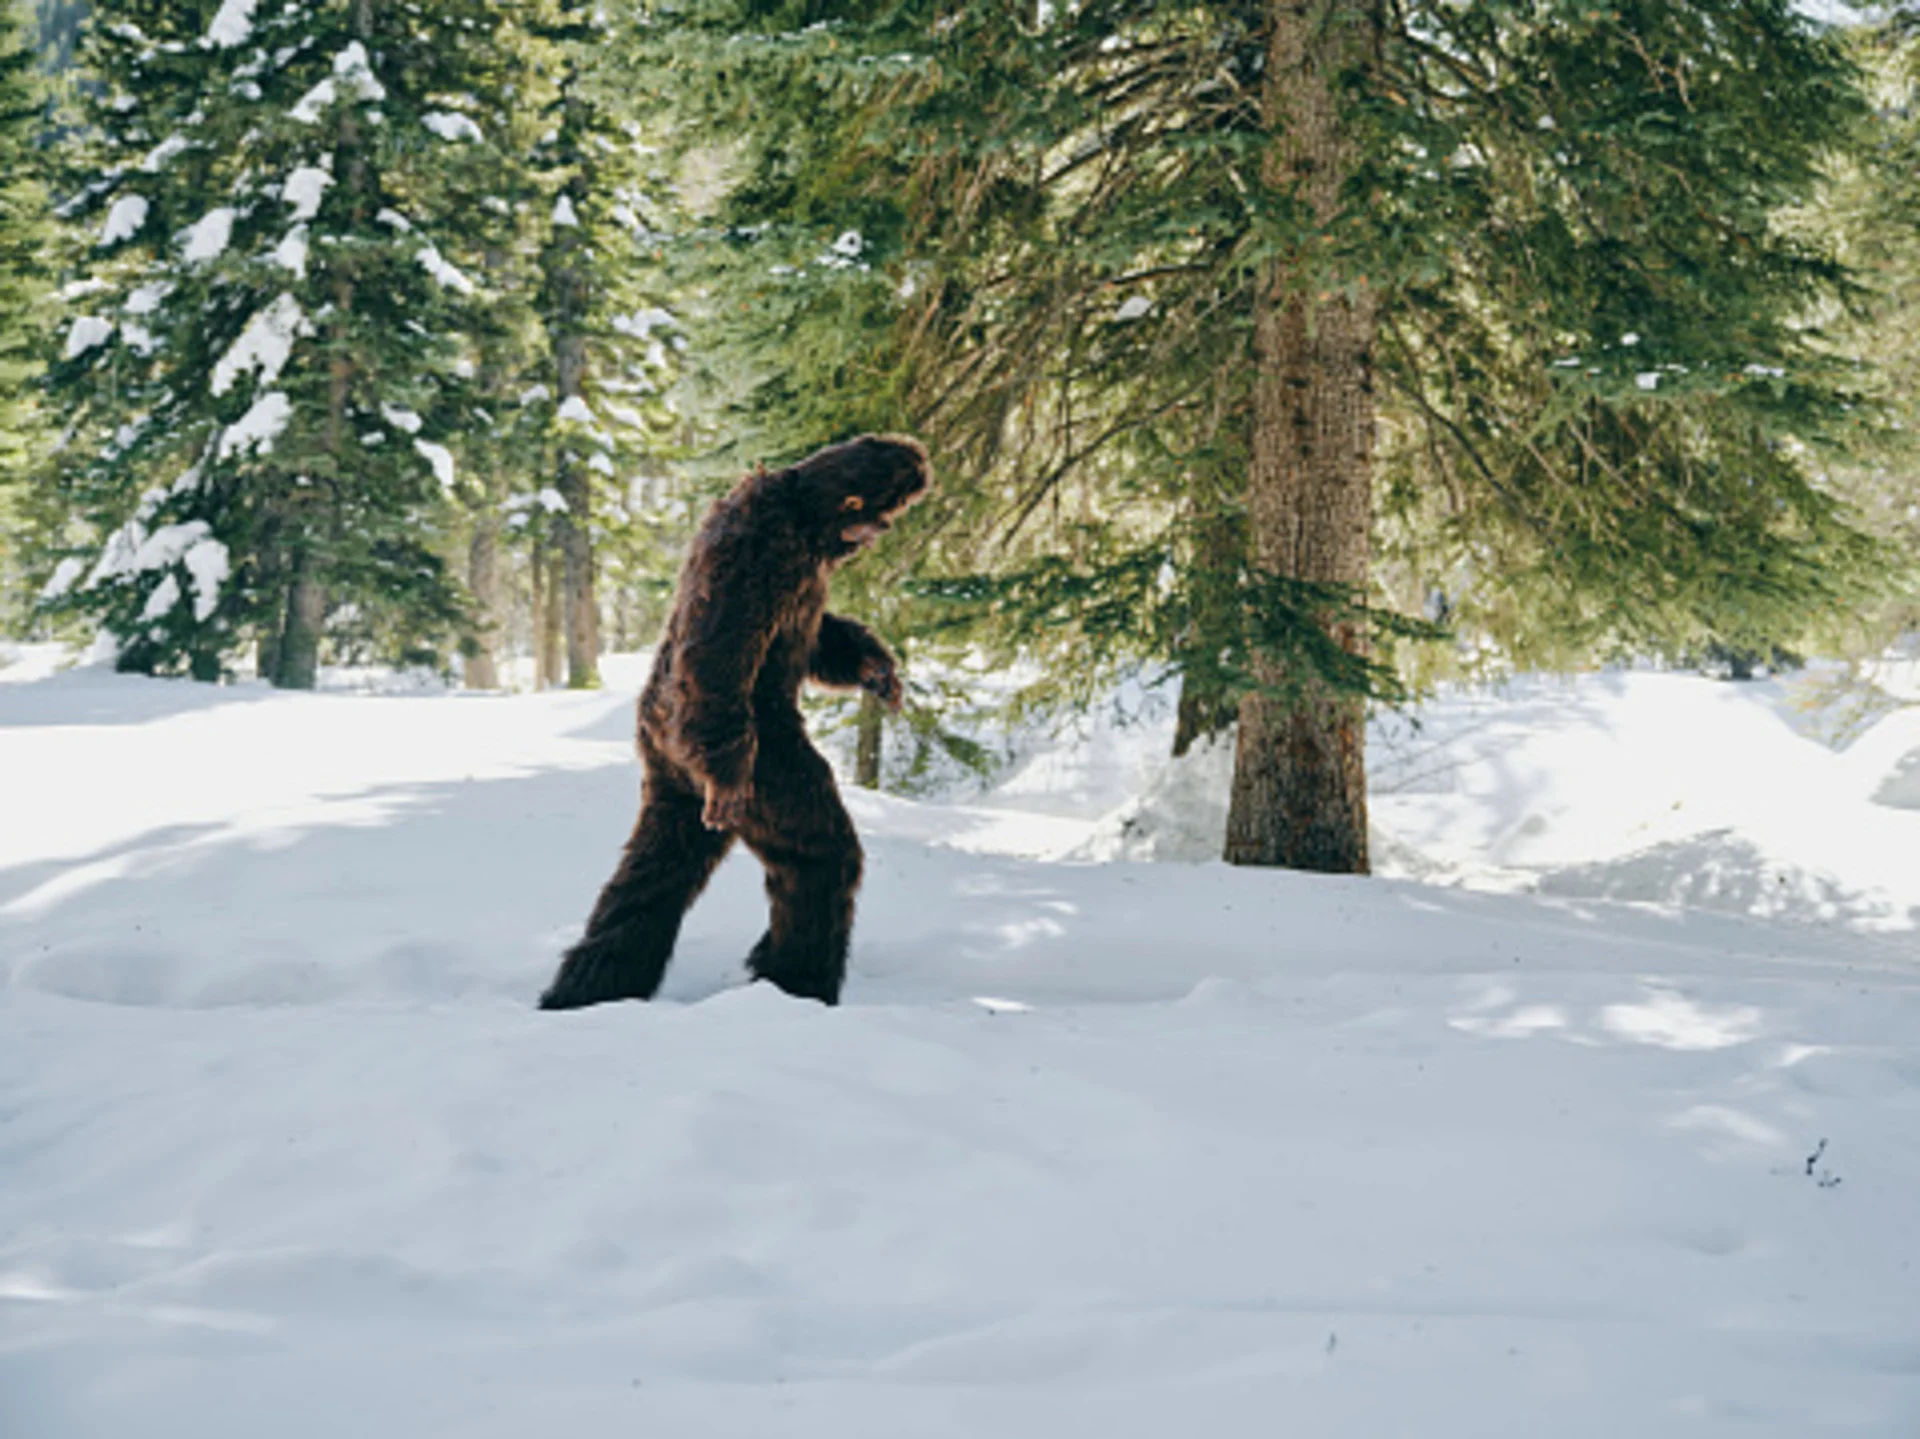 The true origins of sasquatch can be traced back to this Canadian location